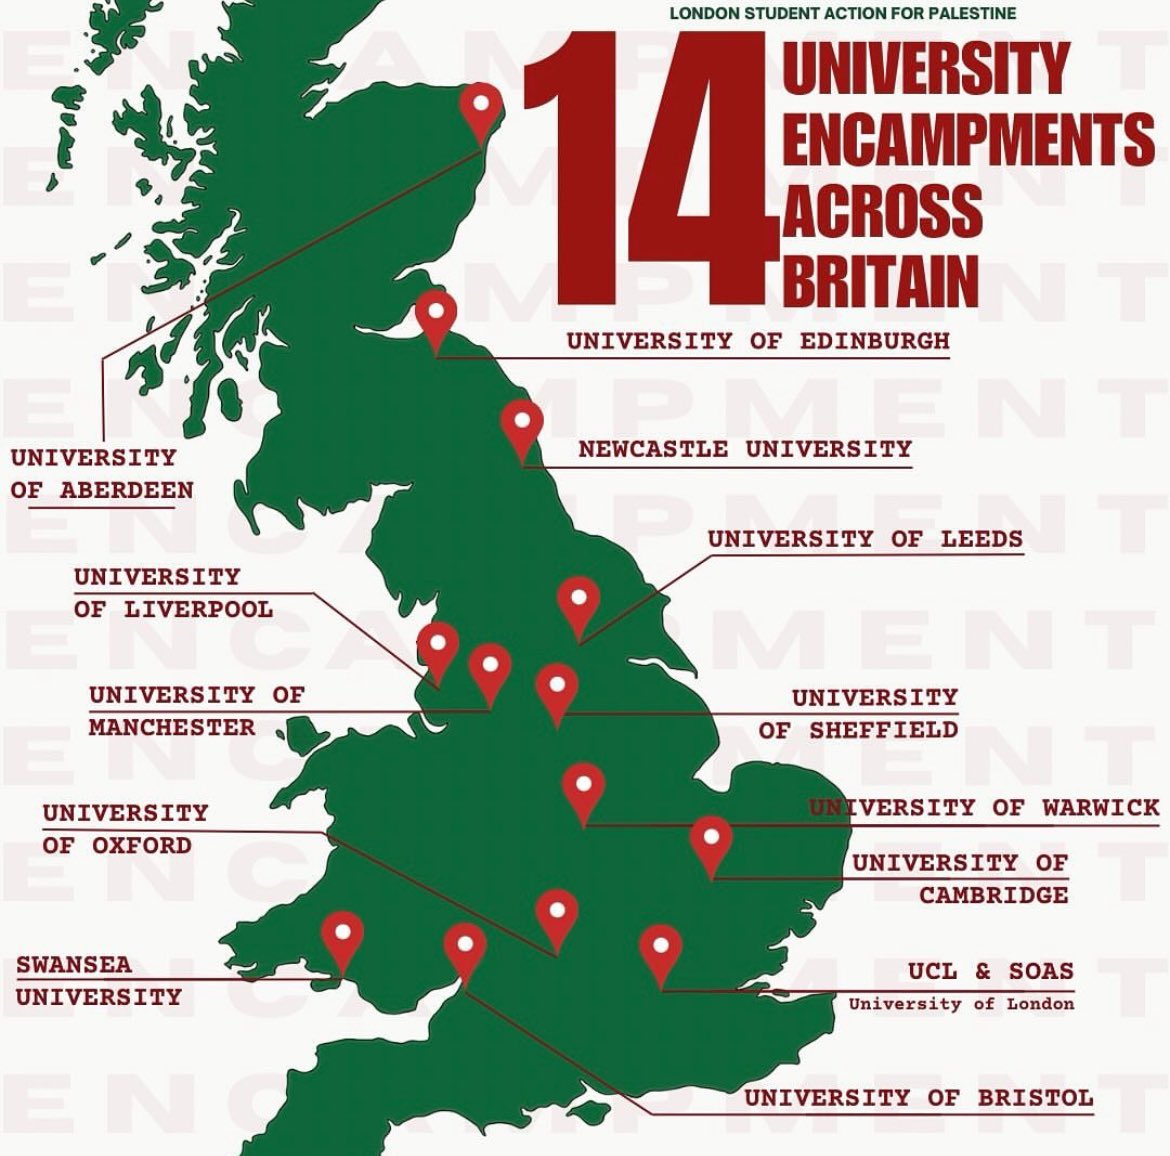 University encampment map from London Student Action for Palestine